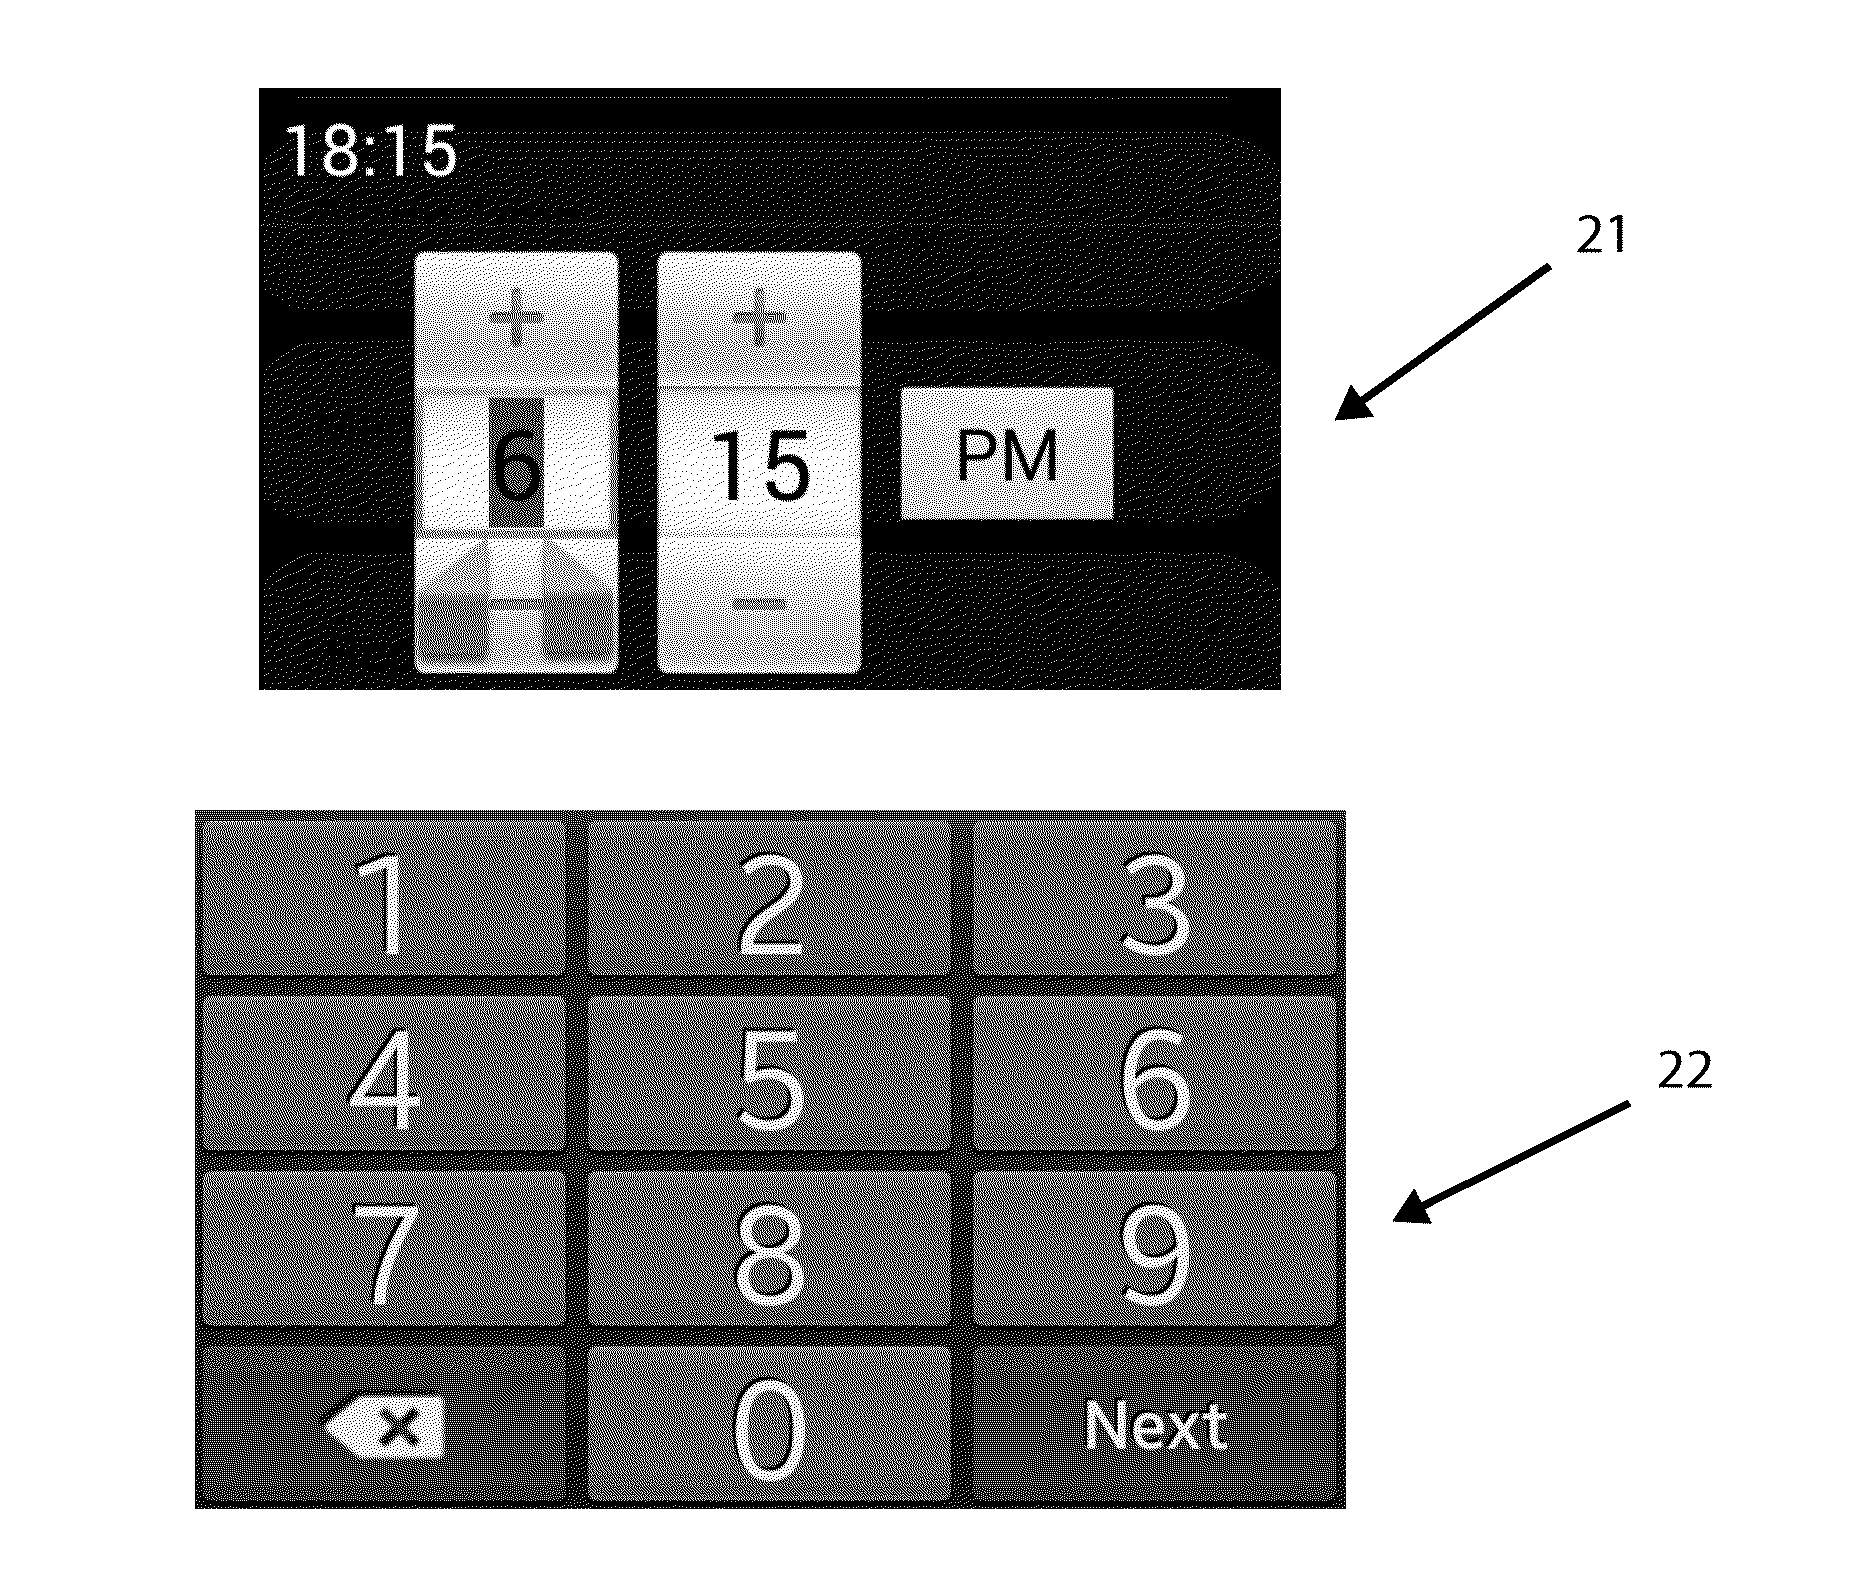 System and method of inputting time on an electronic device having a touch screen